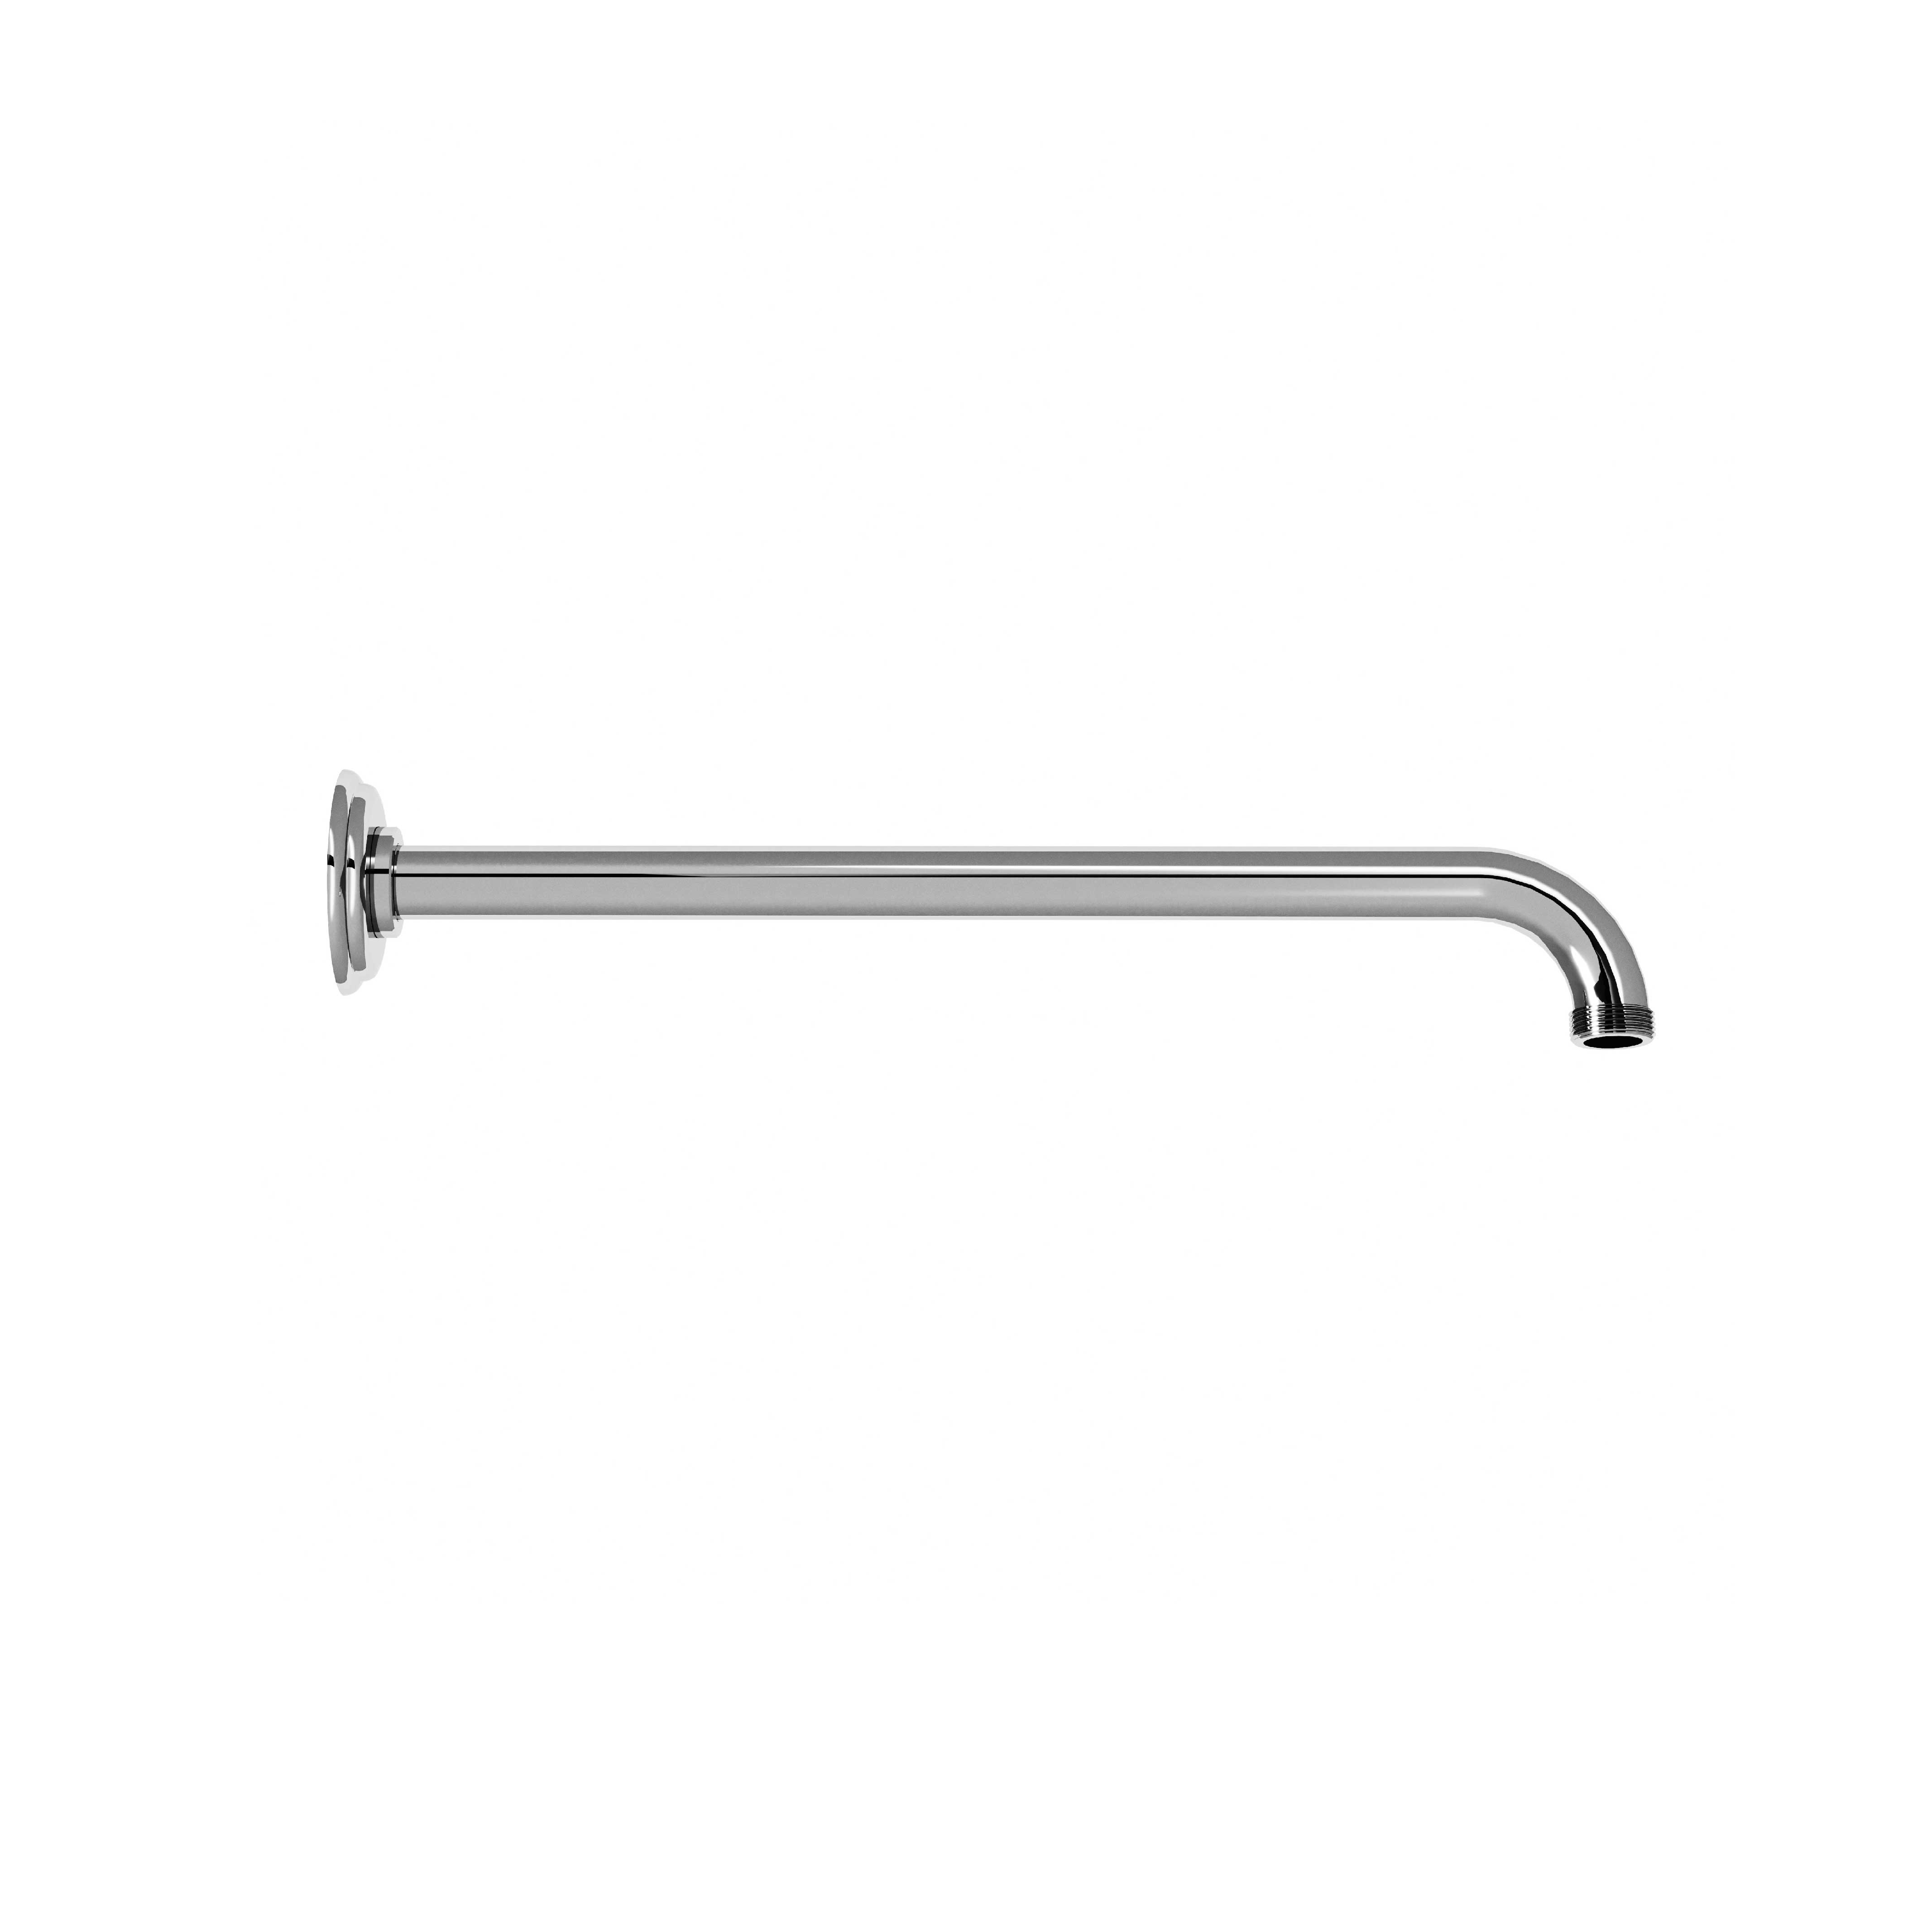 M20-2W301 Wall mounted shower arm 300mm